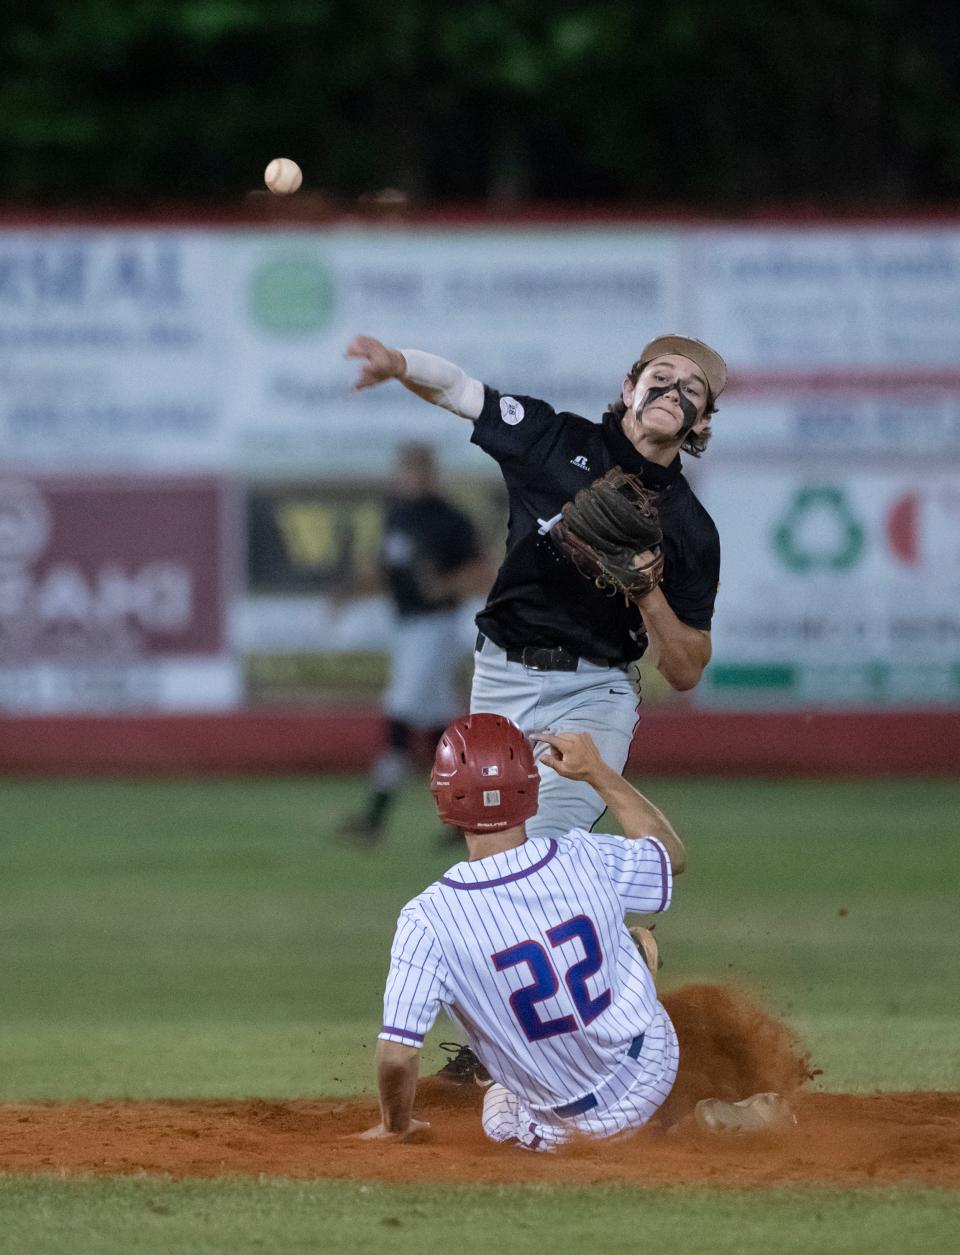 Aggies second baseman Frankie Randall (3) turns the double play to end the bottom of the 6th inning during the Tate vs Pace 6A District 1 championship baseball game at Pace High School on Thursday, May 5, 2022.